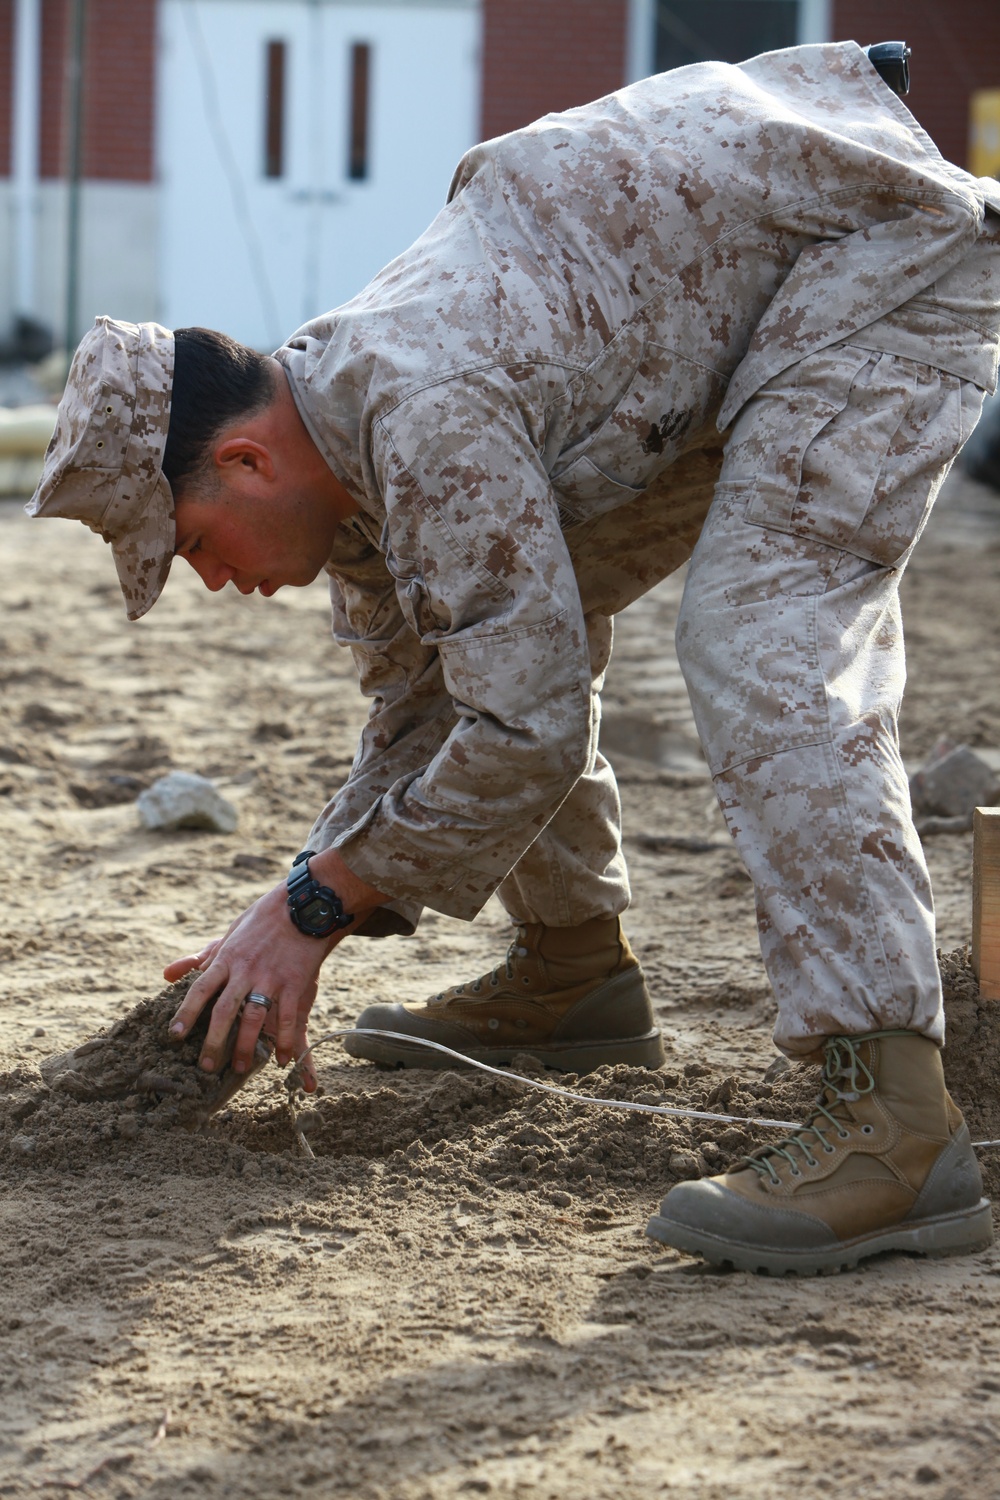 IED training: more than meets the eye